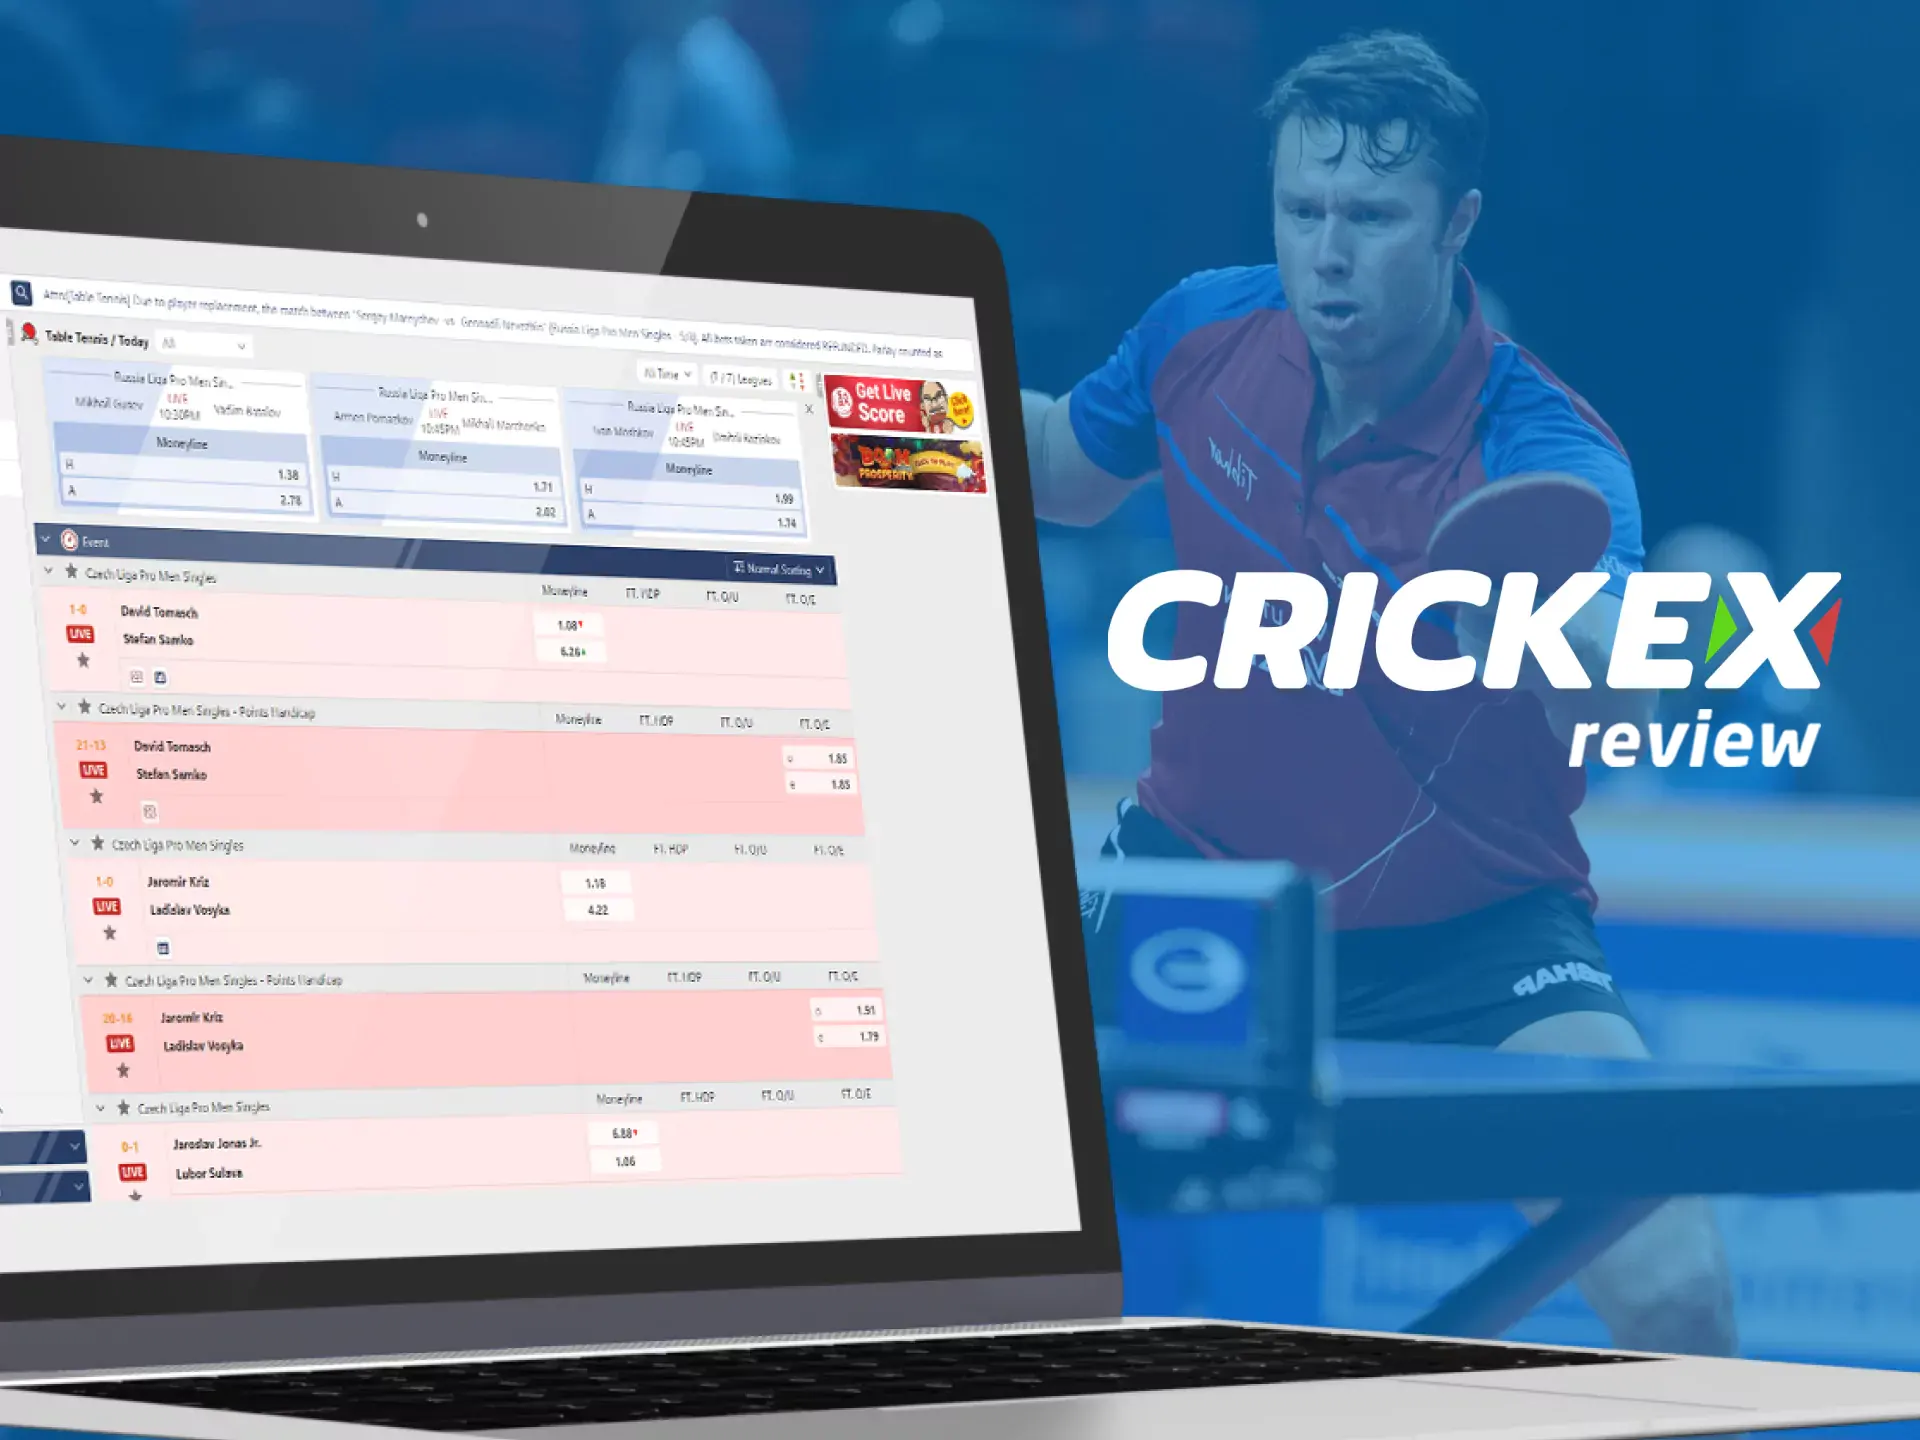 Choose table tennis from Crickex for betting.